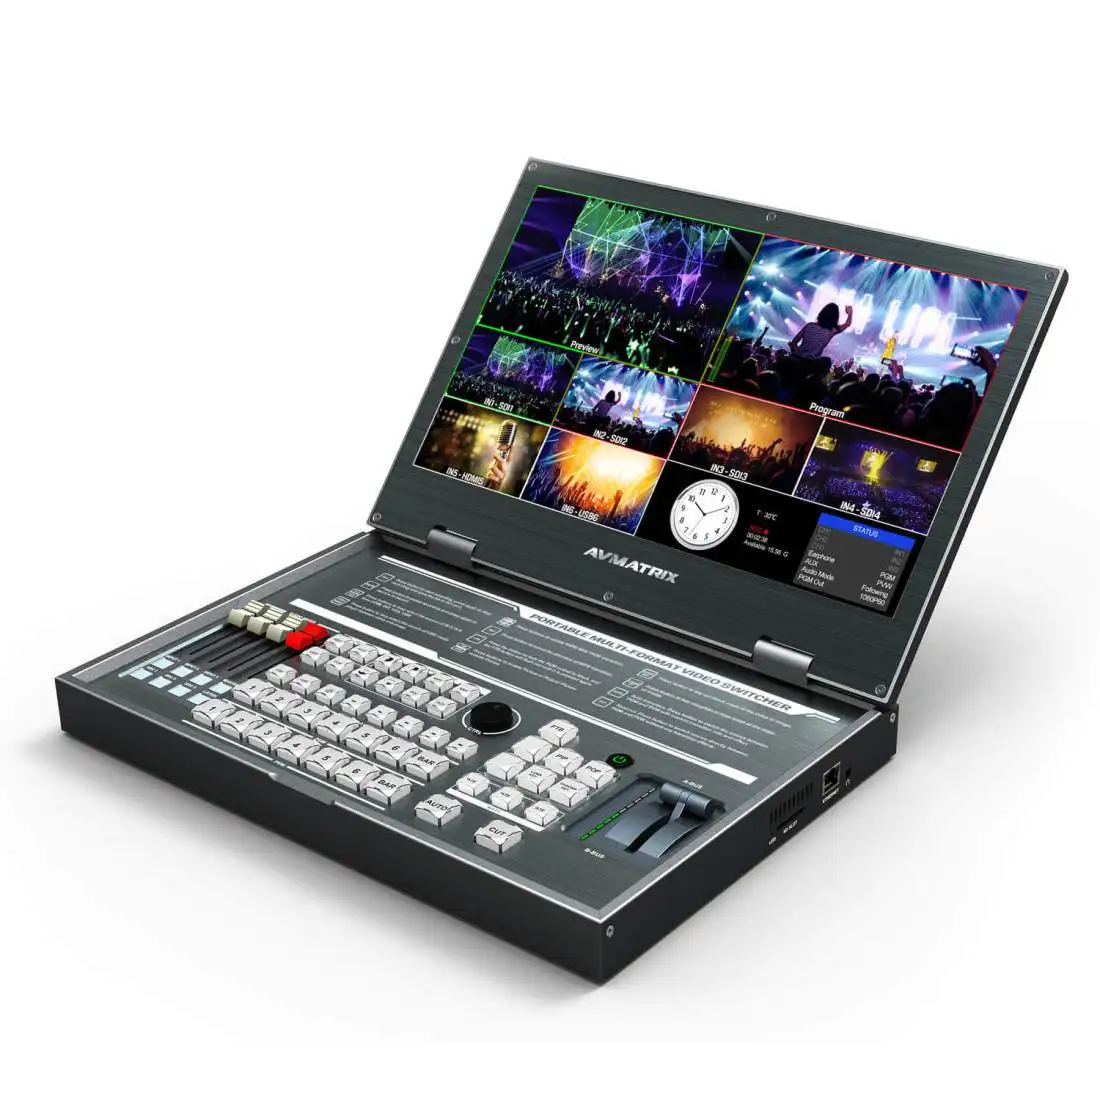 

AVMatrix PVS0615 6 Channel Multi-format Video Switcher 15.6 inch FHD LCD Display HDM SDI PGM Out 1080p60 for Live Sports